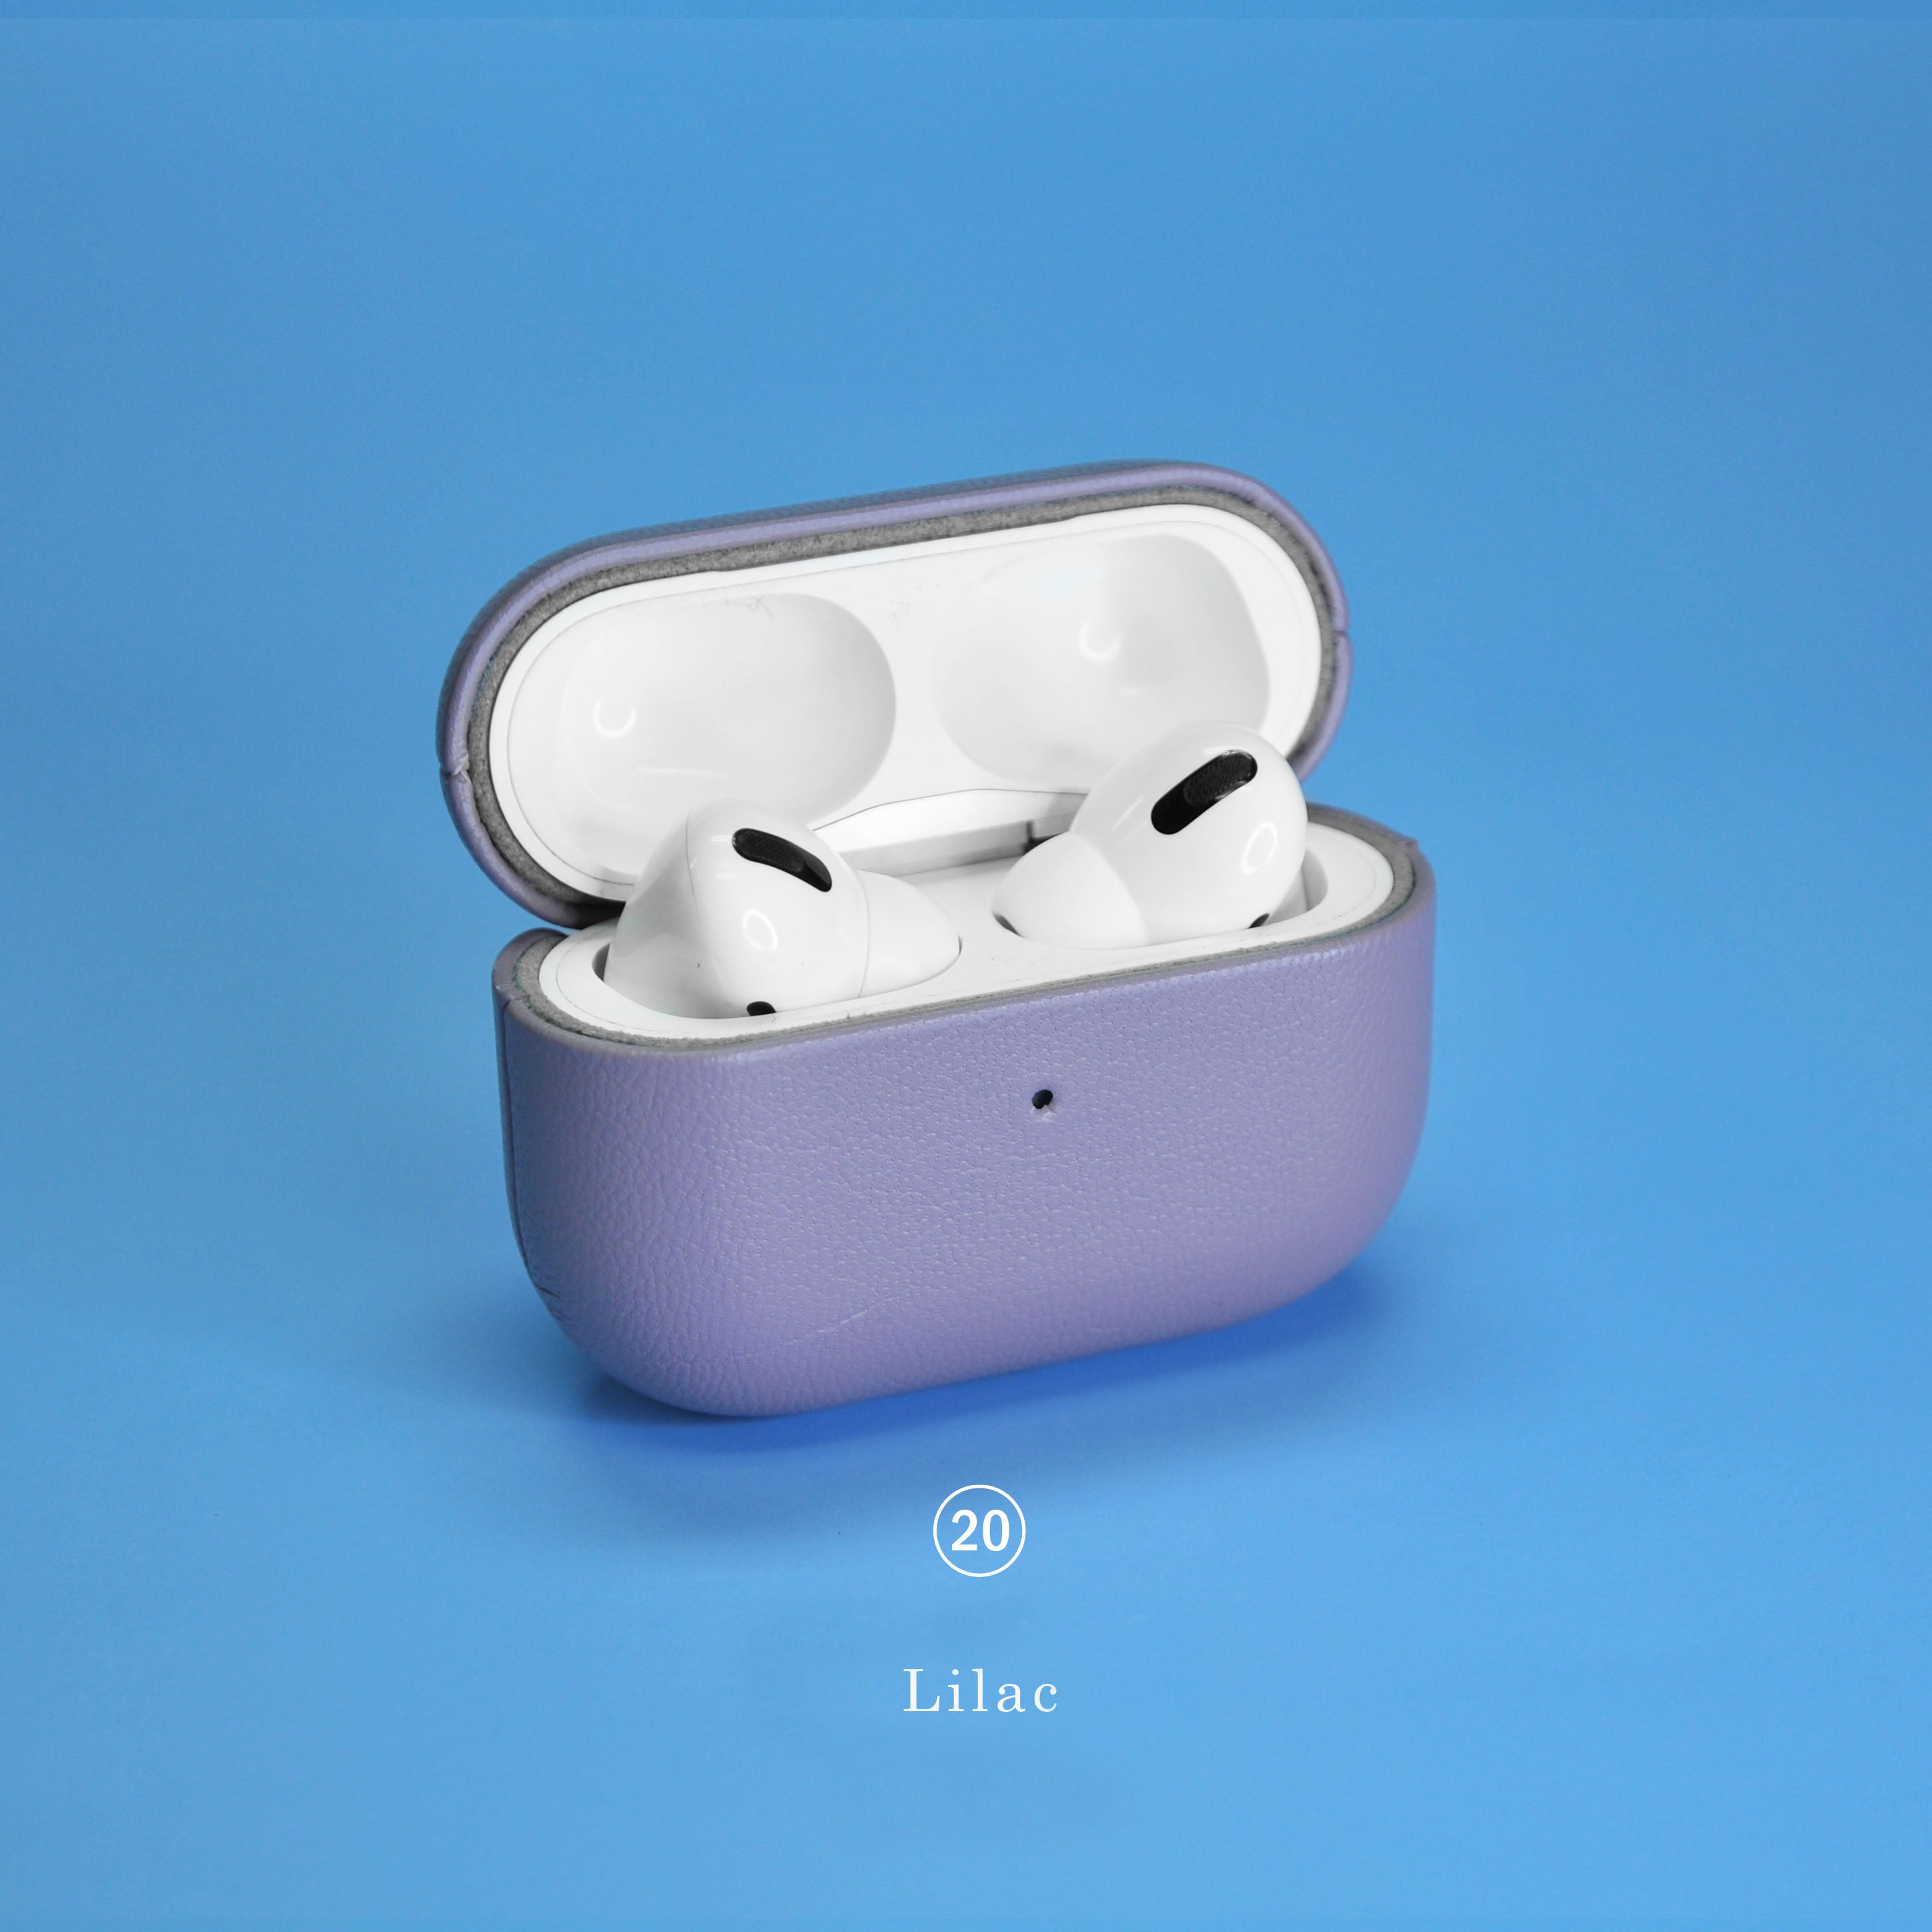 Lilac Leather AirPod Case